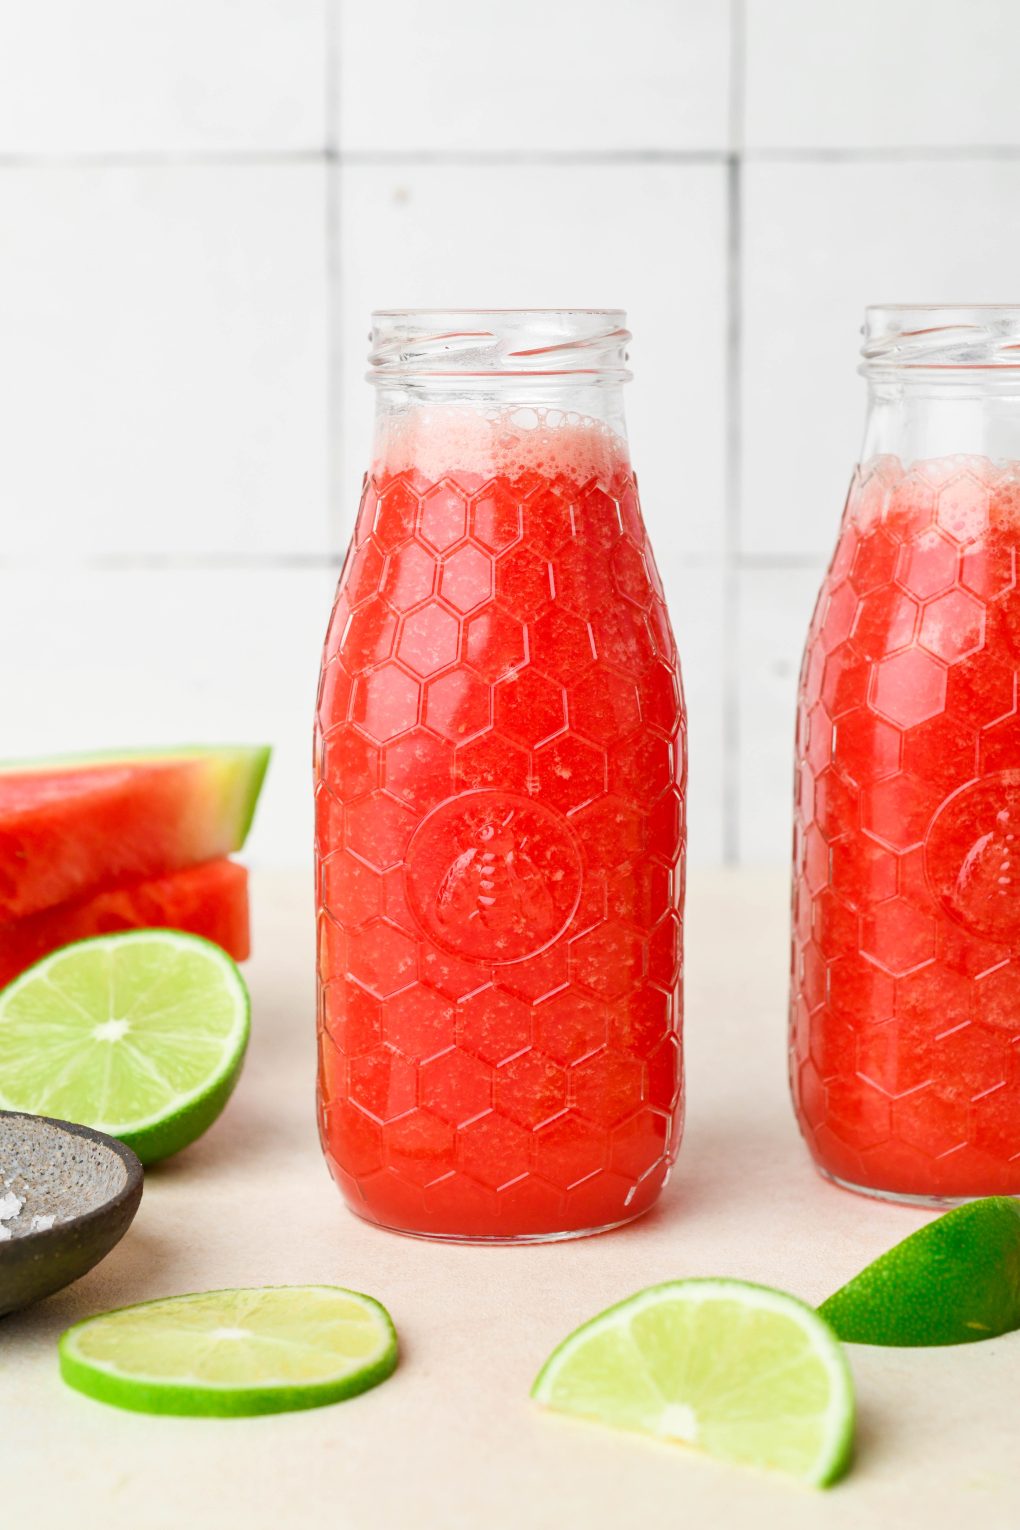 Bright pink watermelon juice in two small textured glass jars, next to a stack of cut up watermelon and some lime wedges.